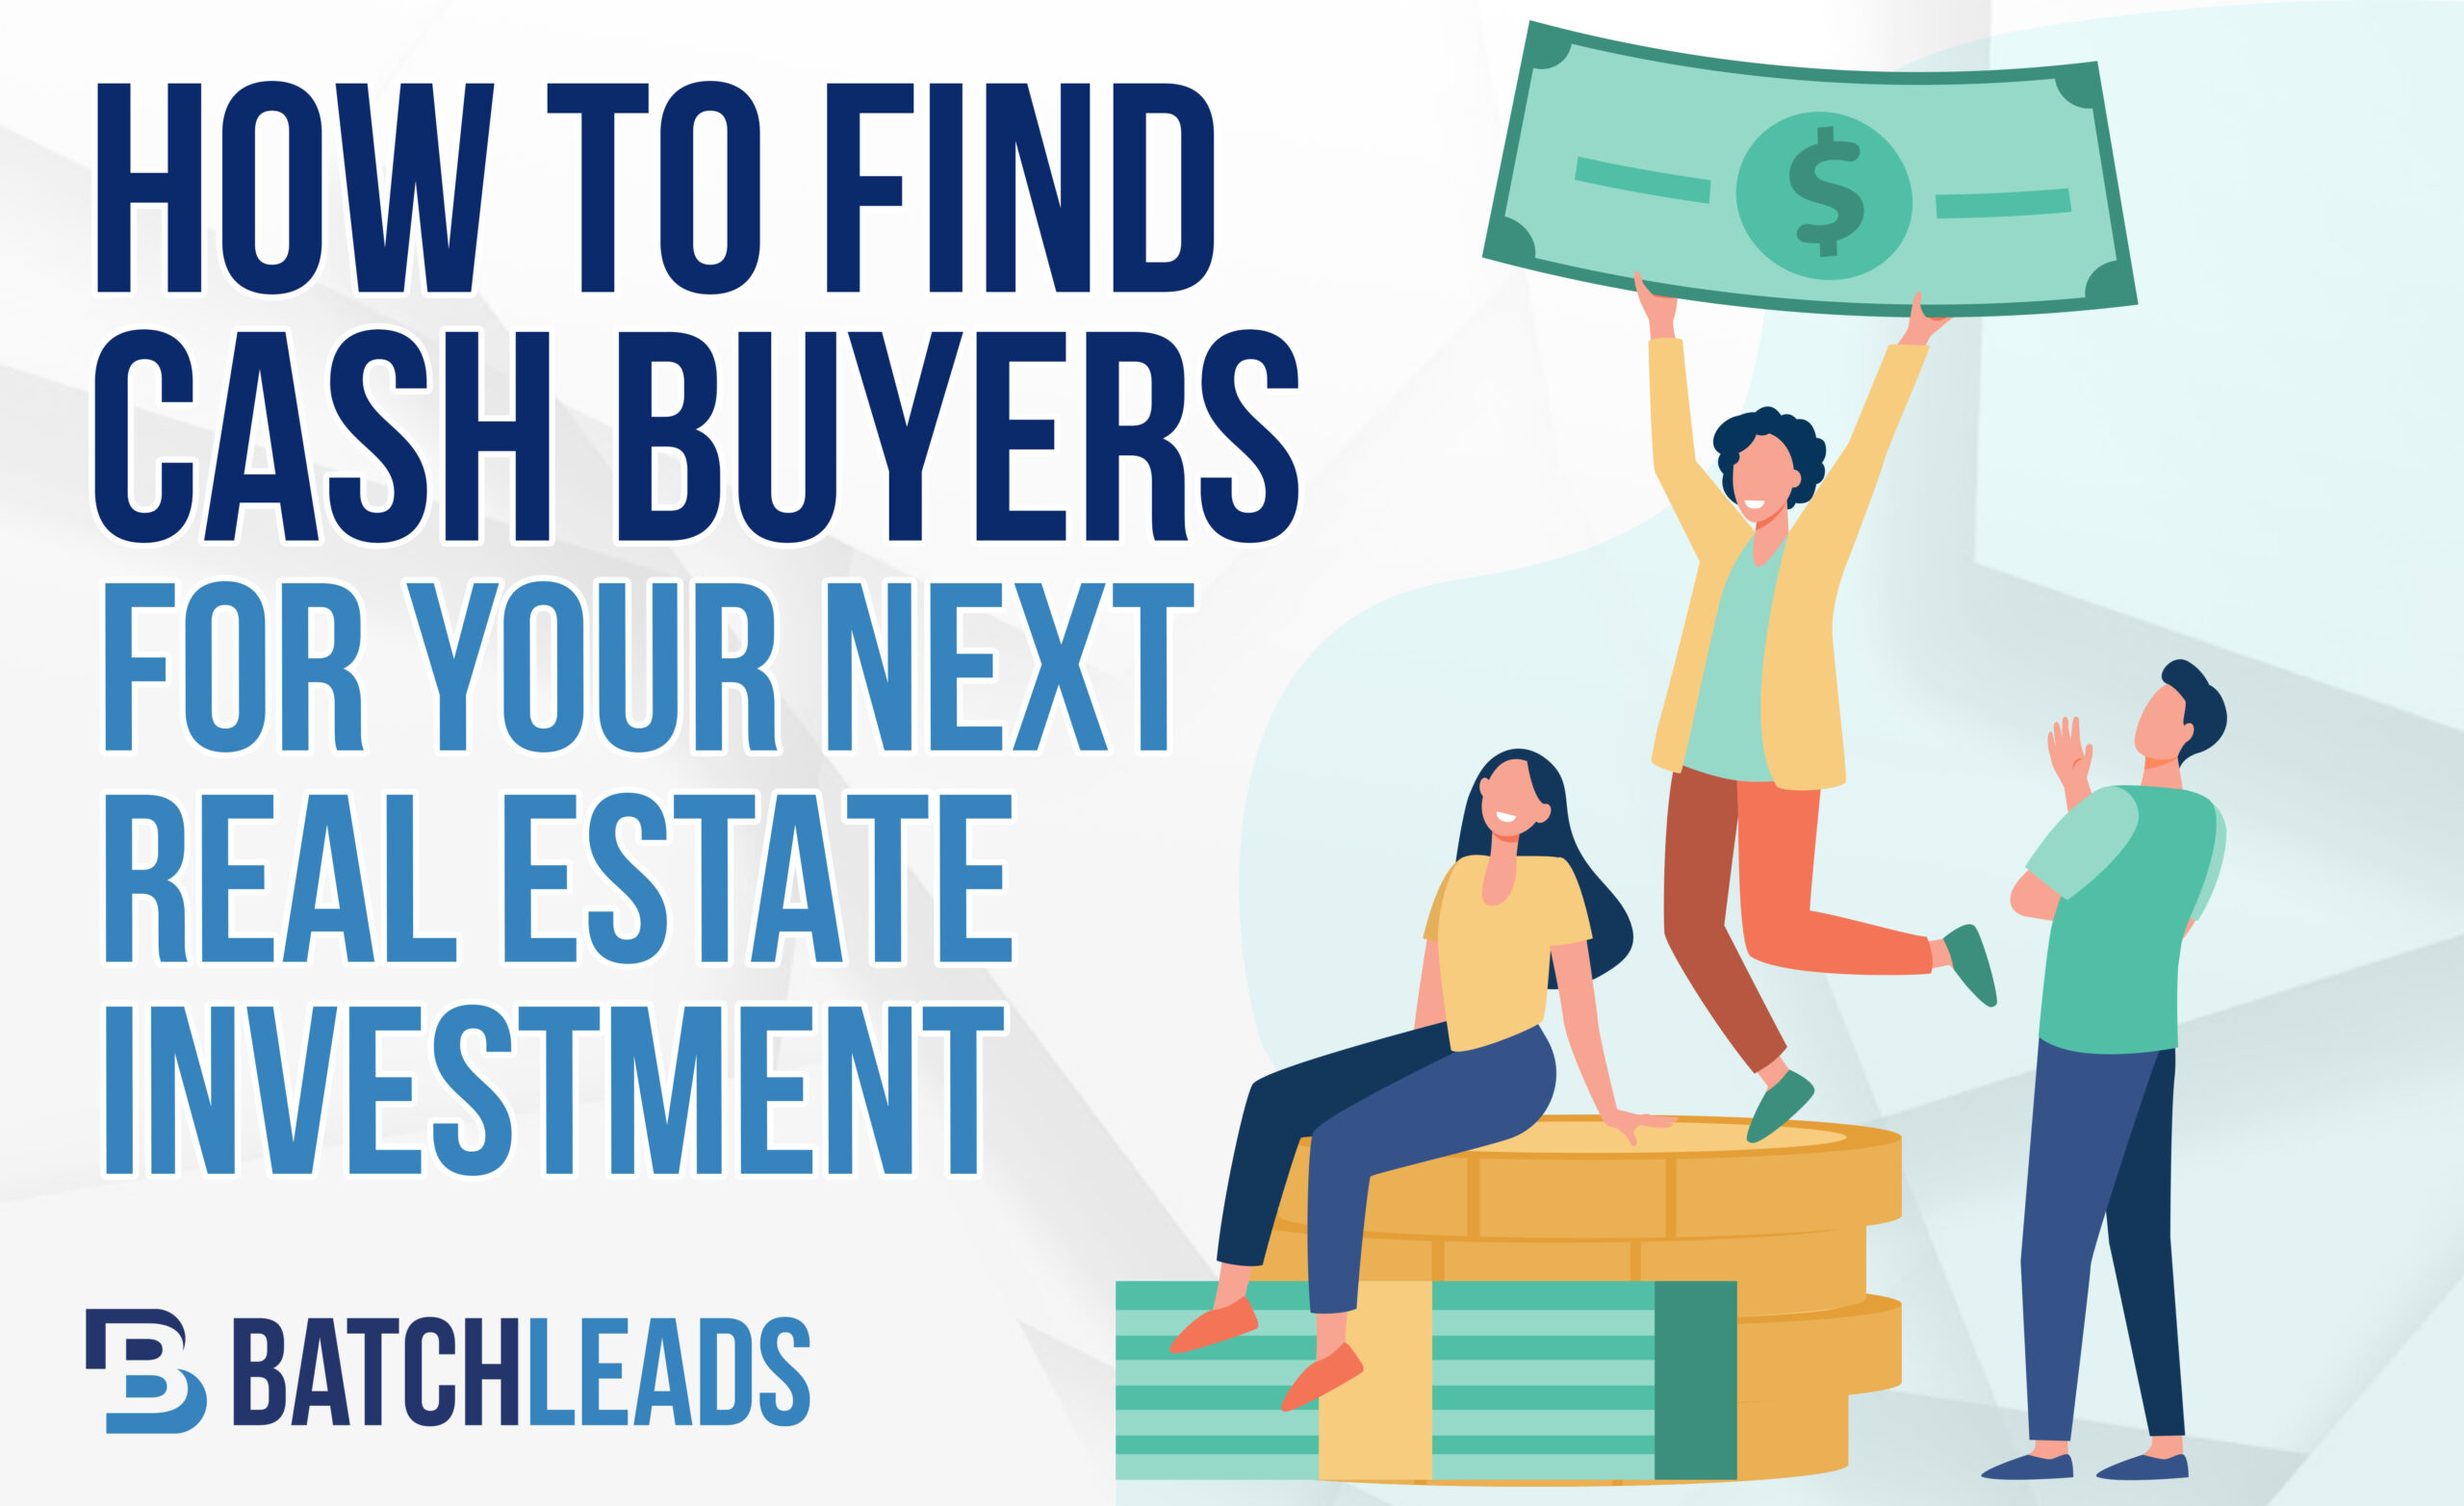 How To Find Cash Buyers For Your Next Real Estate Investment